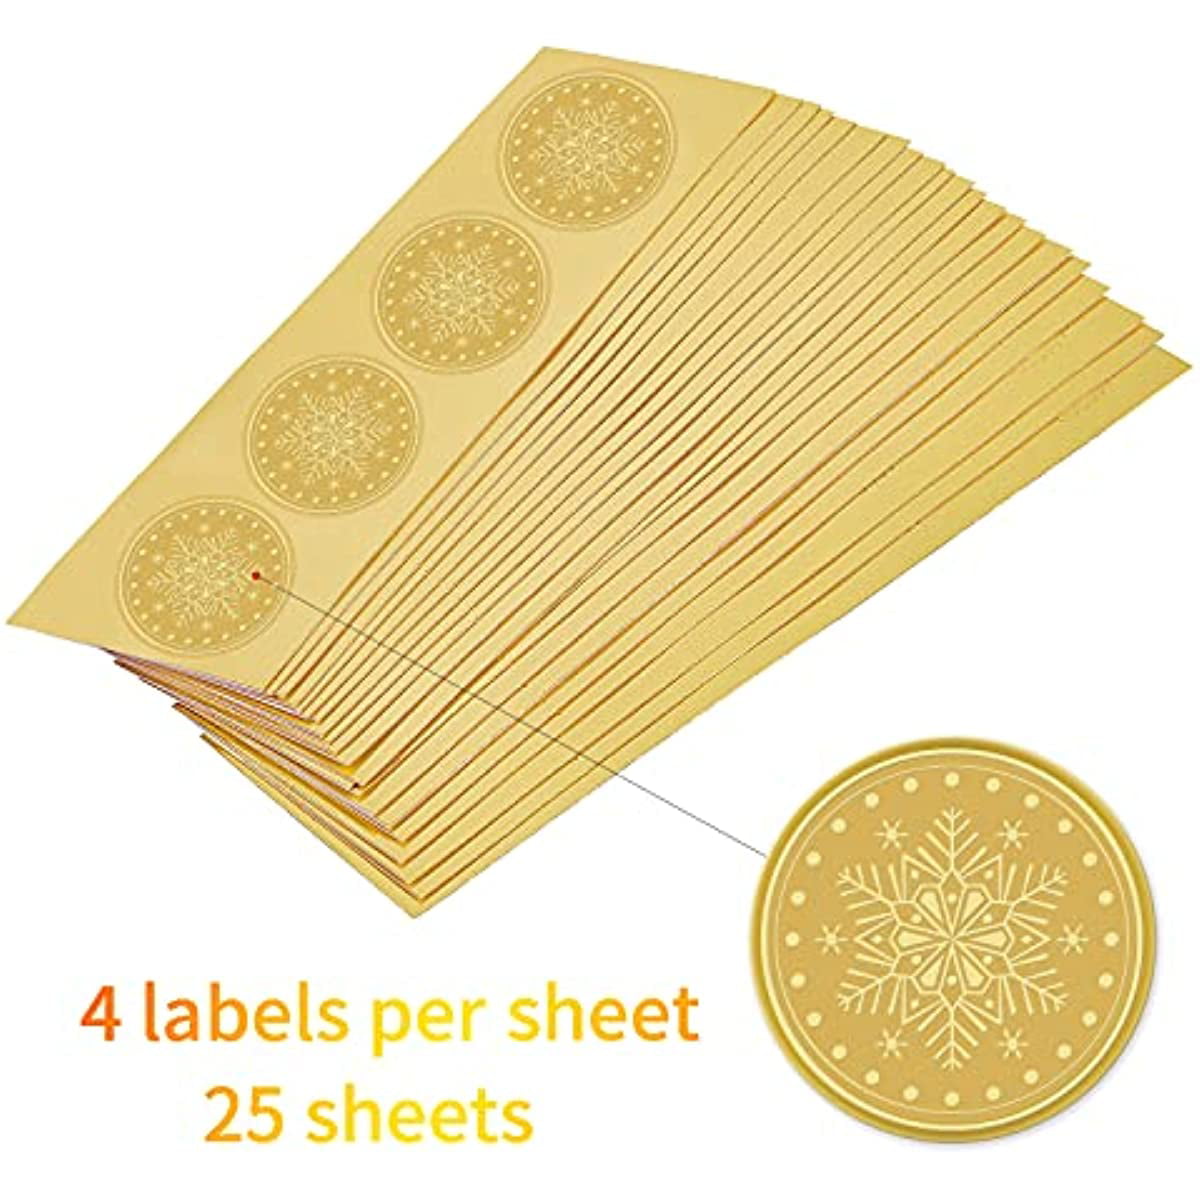  CRASPIRE 2 Gold Foil Sticker Honor Roll 100pcs Certificate  Seals Silver Embossed Round Olive Leaf Gold Certificate Seal Stickers for  Envelopes Invitation Card Diplomas Awards Graduation : Office Products